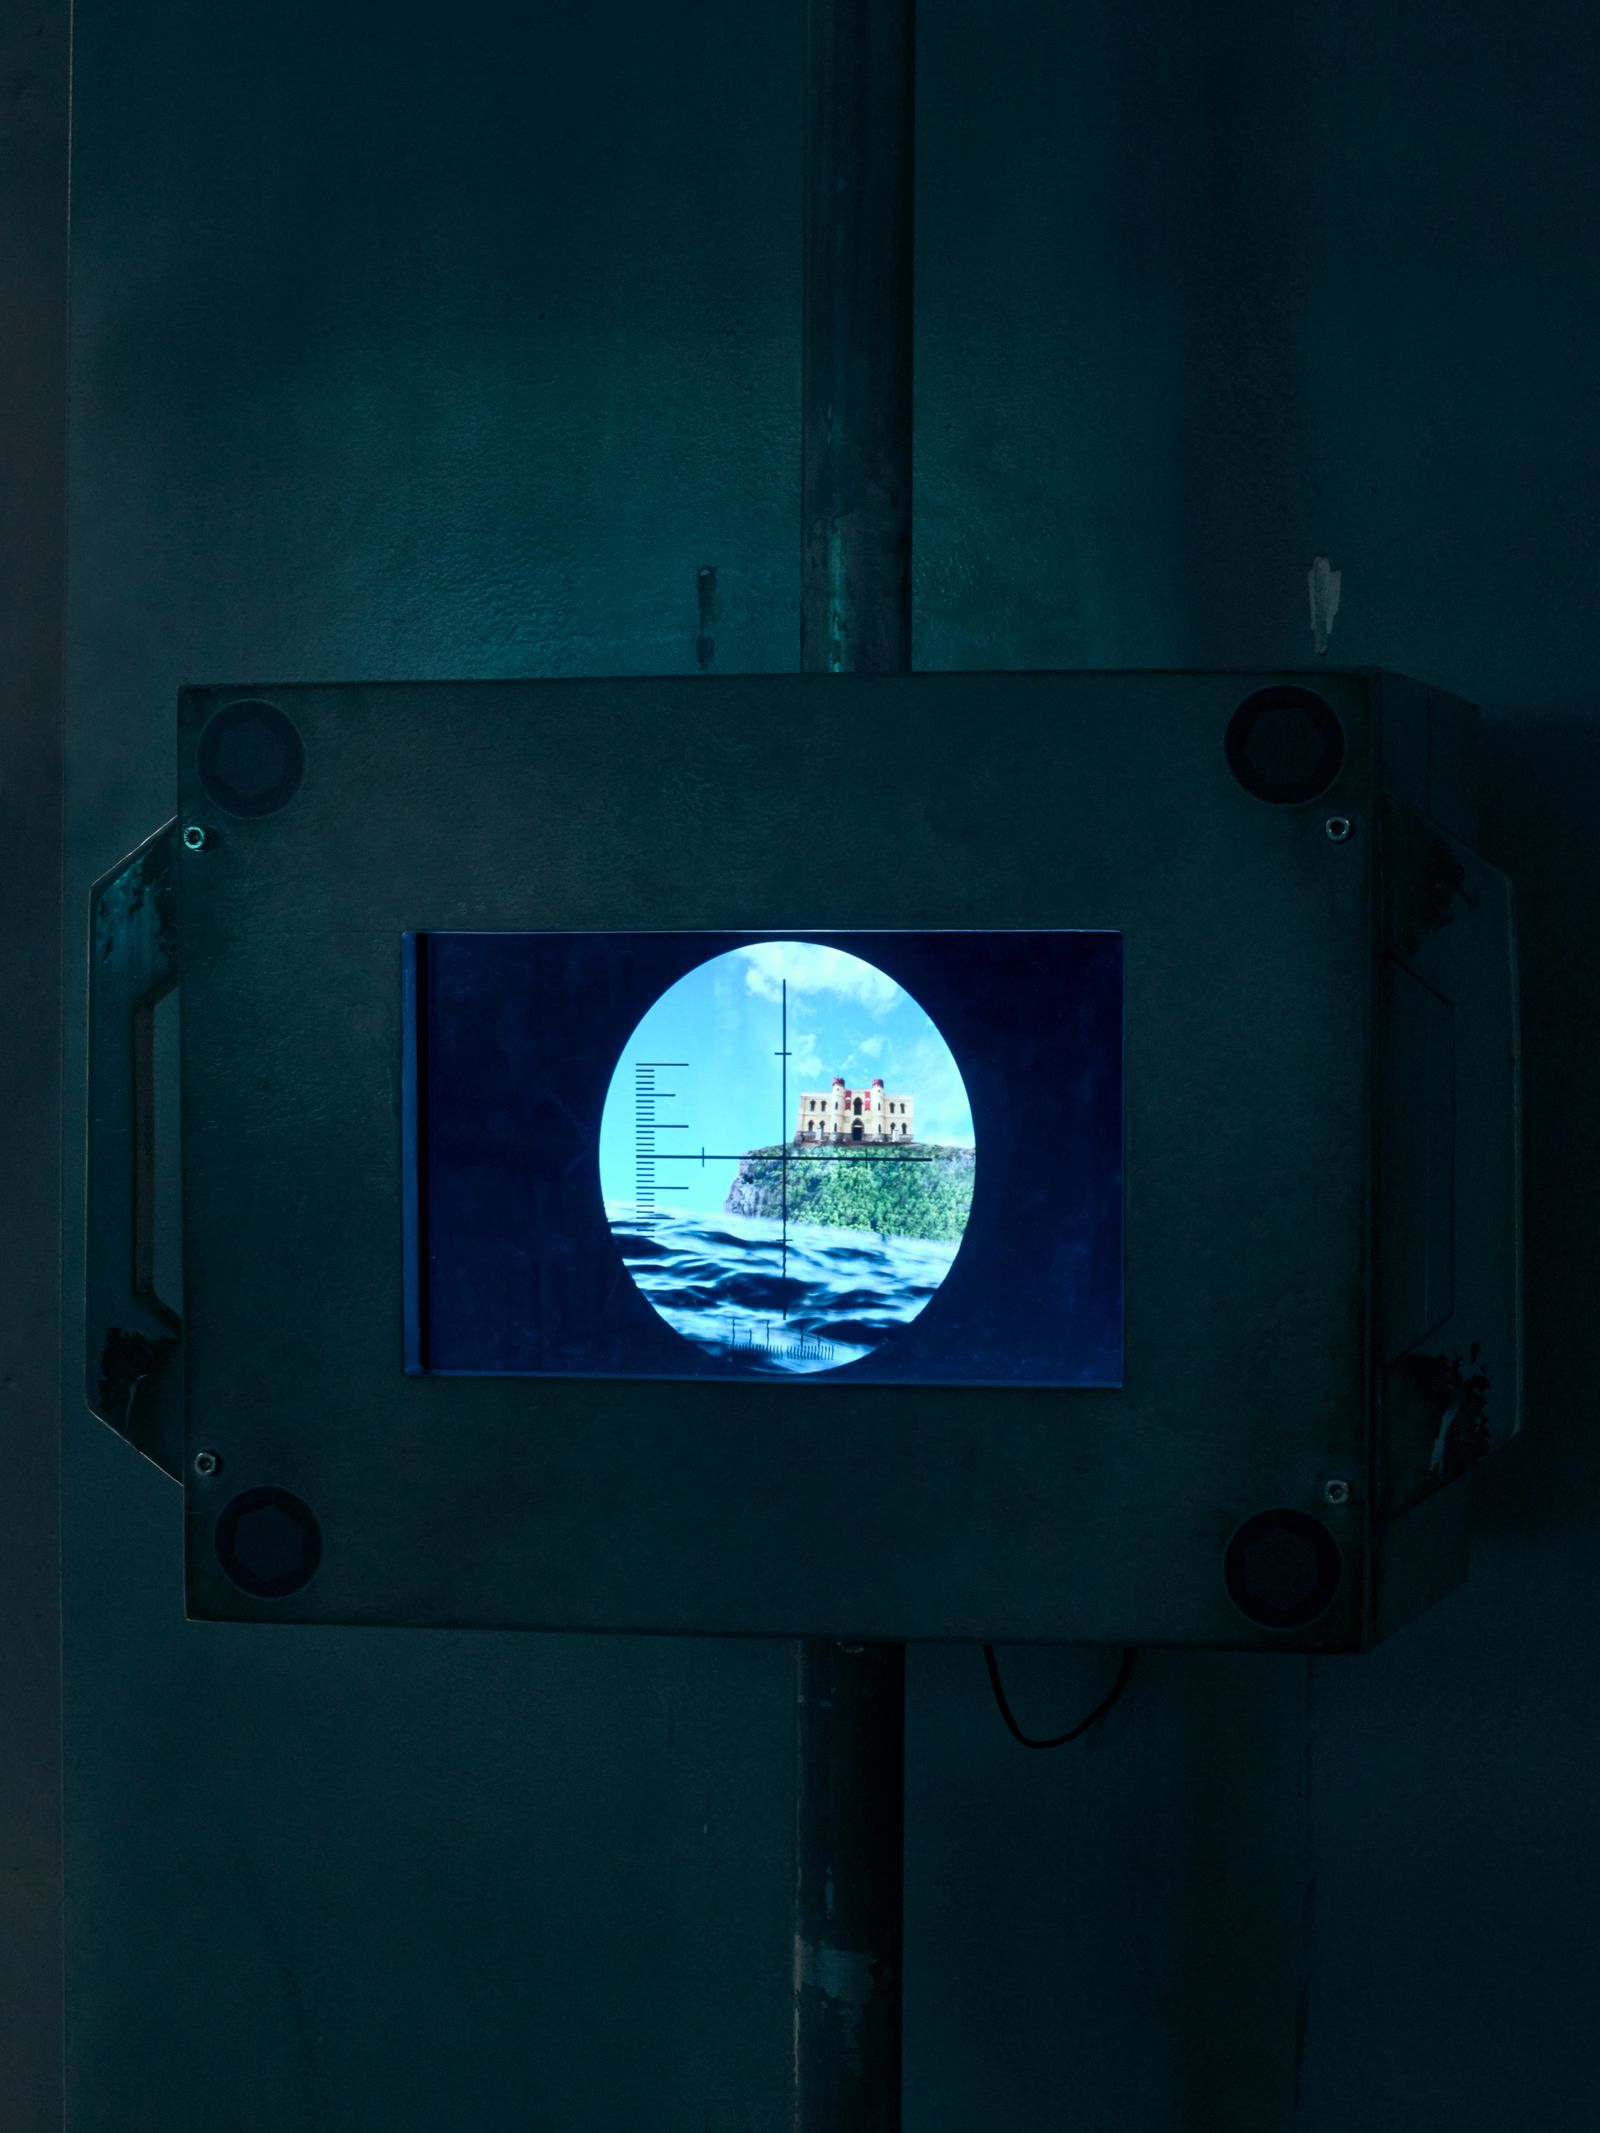 © Joel Jimenez - Submarine periscope replica showing an animation of the Children's Museum of Costa Rica on an island.